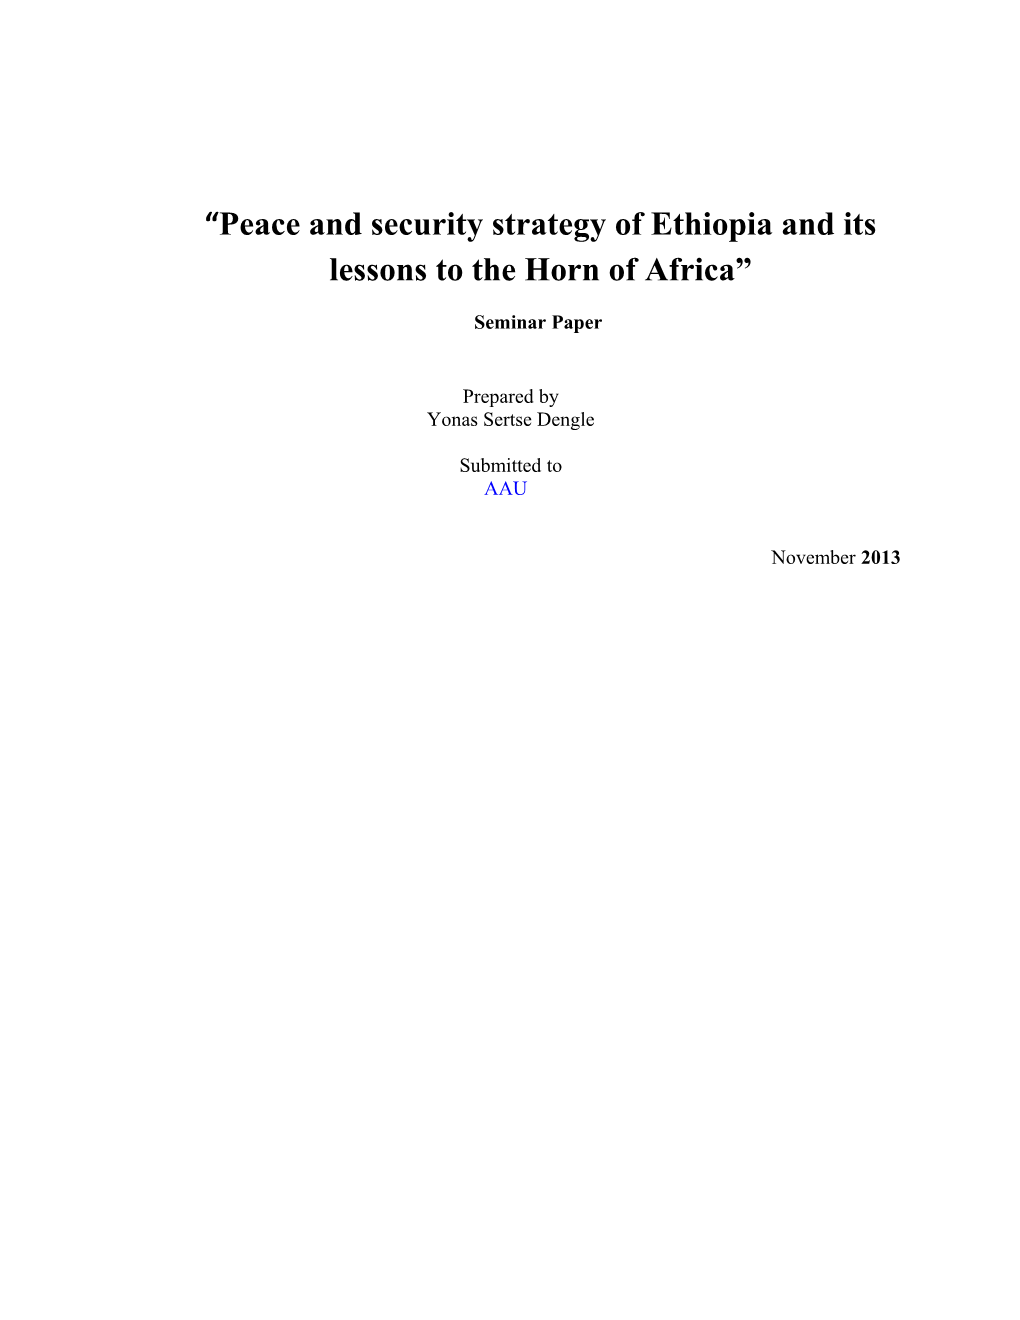 Peace and Security Strategy of Ethiopia and Its Lessons to the Horn of Africa